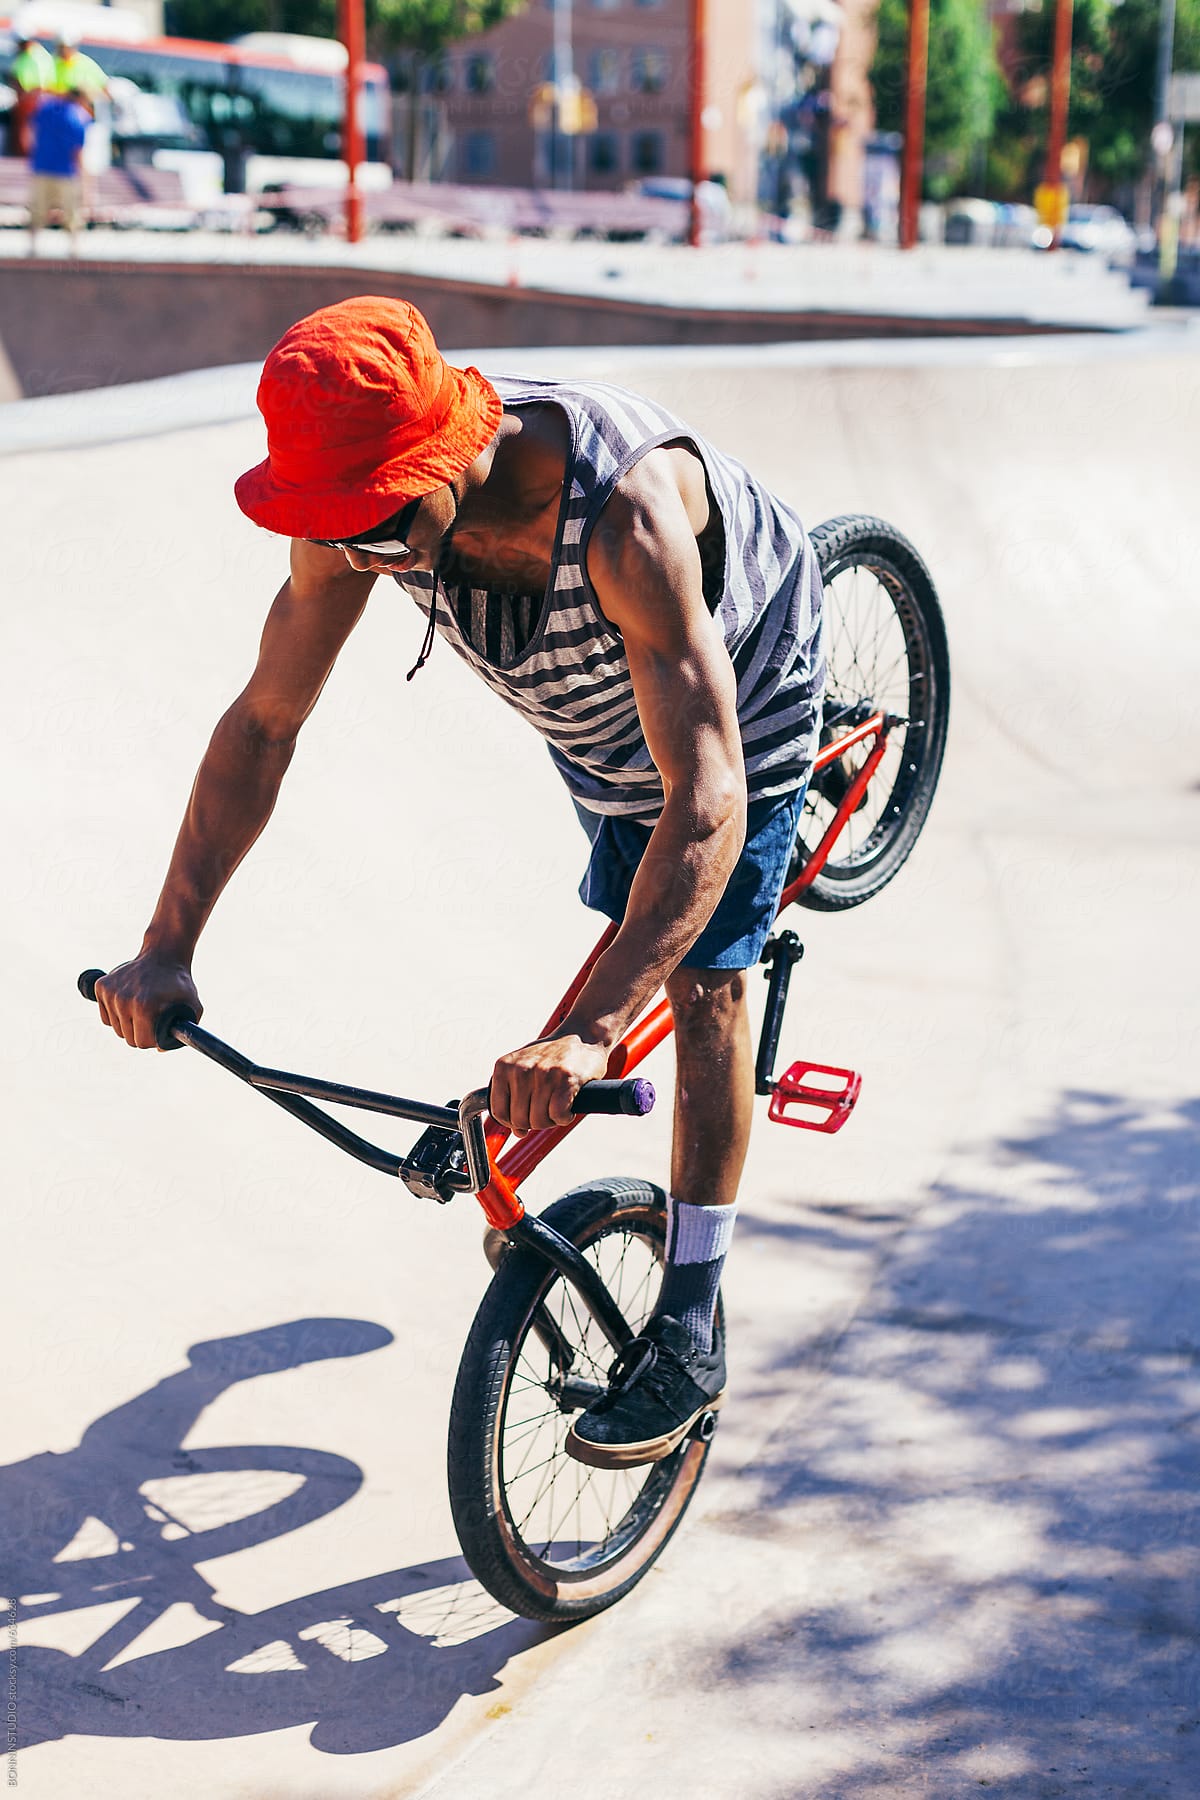 Young man jumping with BMX bike in a skate park.